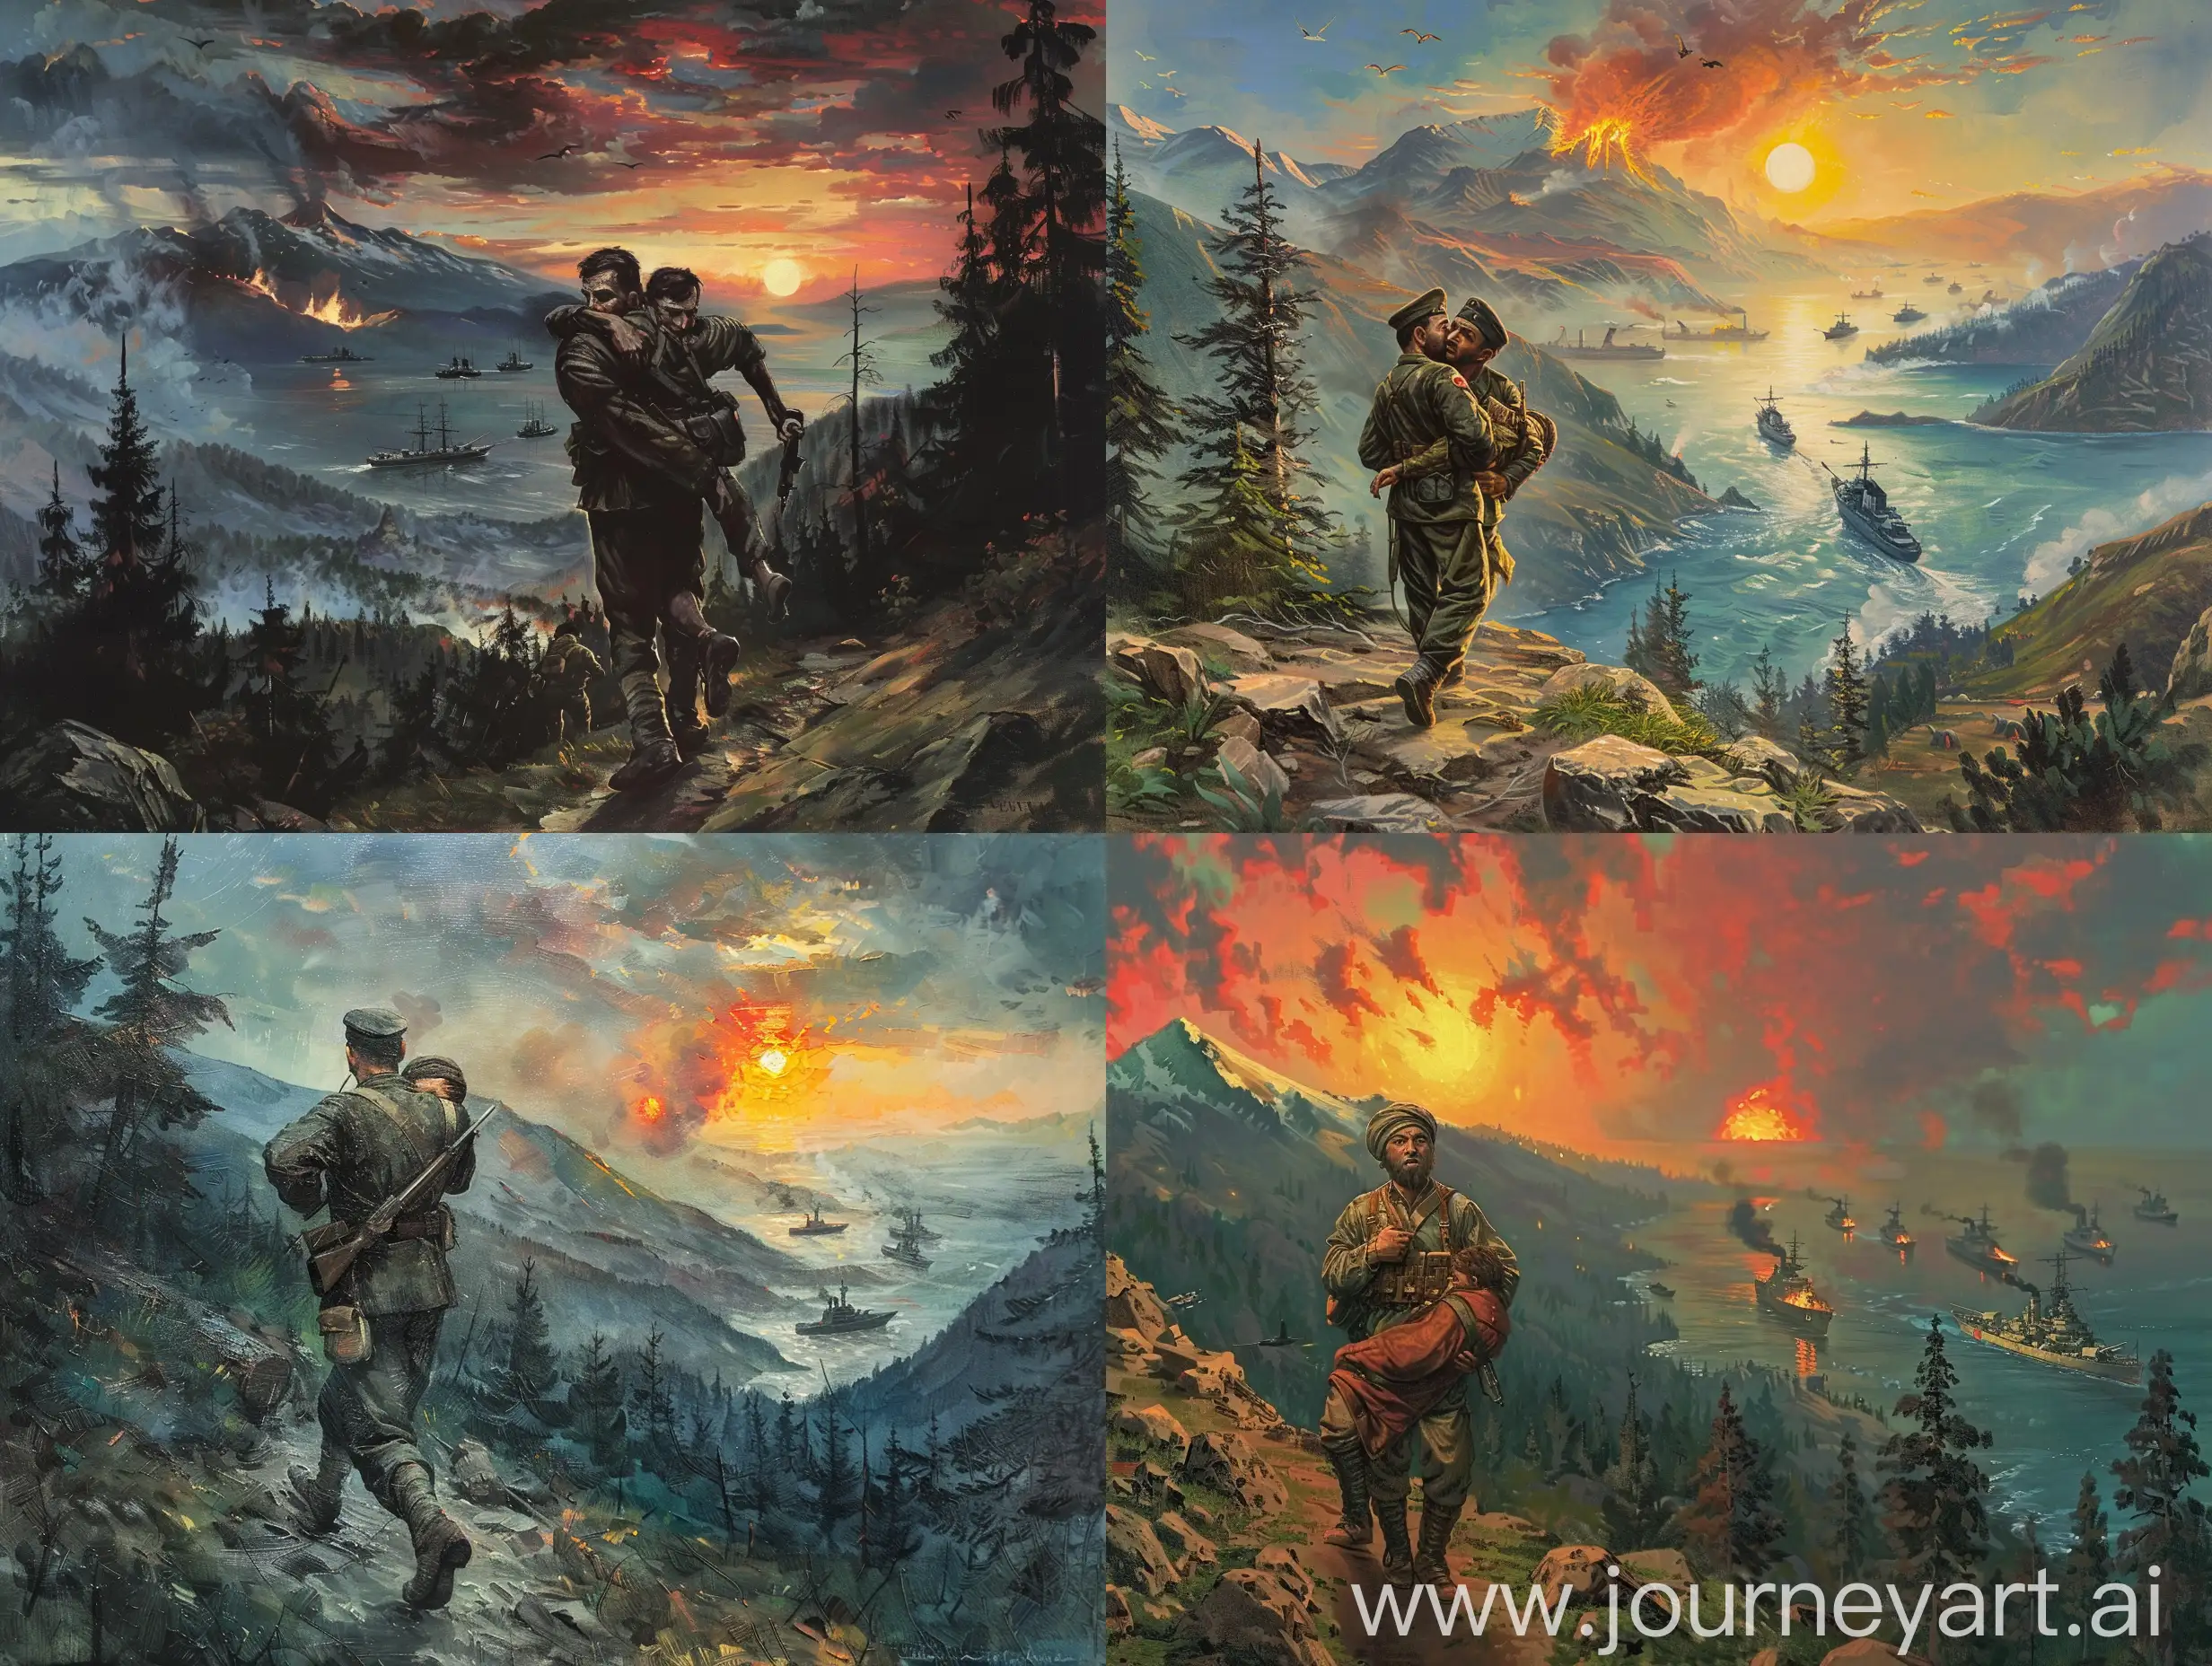 Courageous-Ottoman-Soldier-Carrying-Wounded-Comrade-War-Scene-at-Sunrise